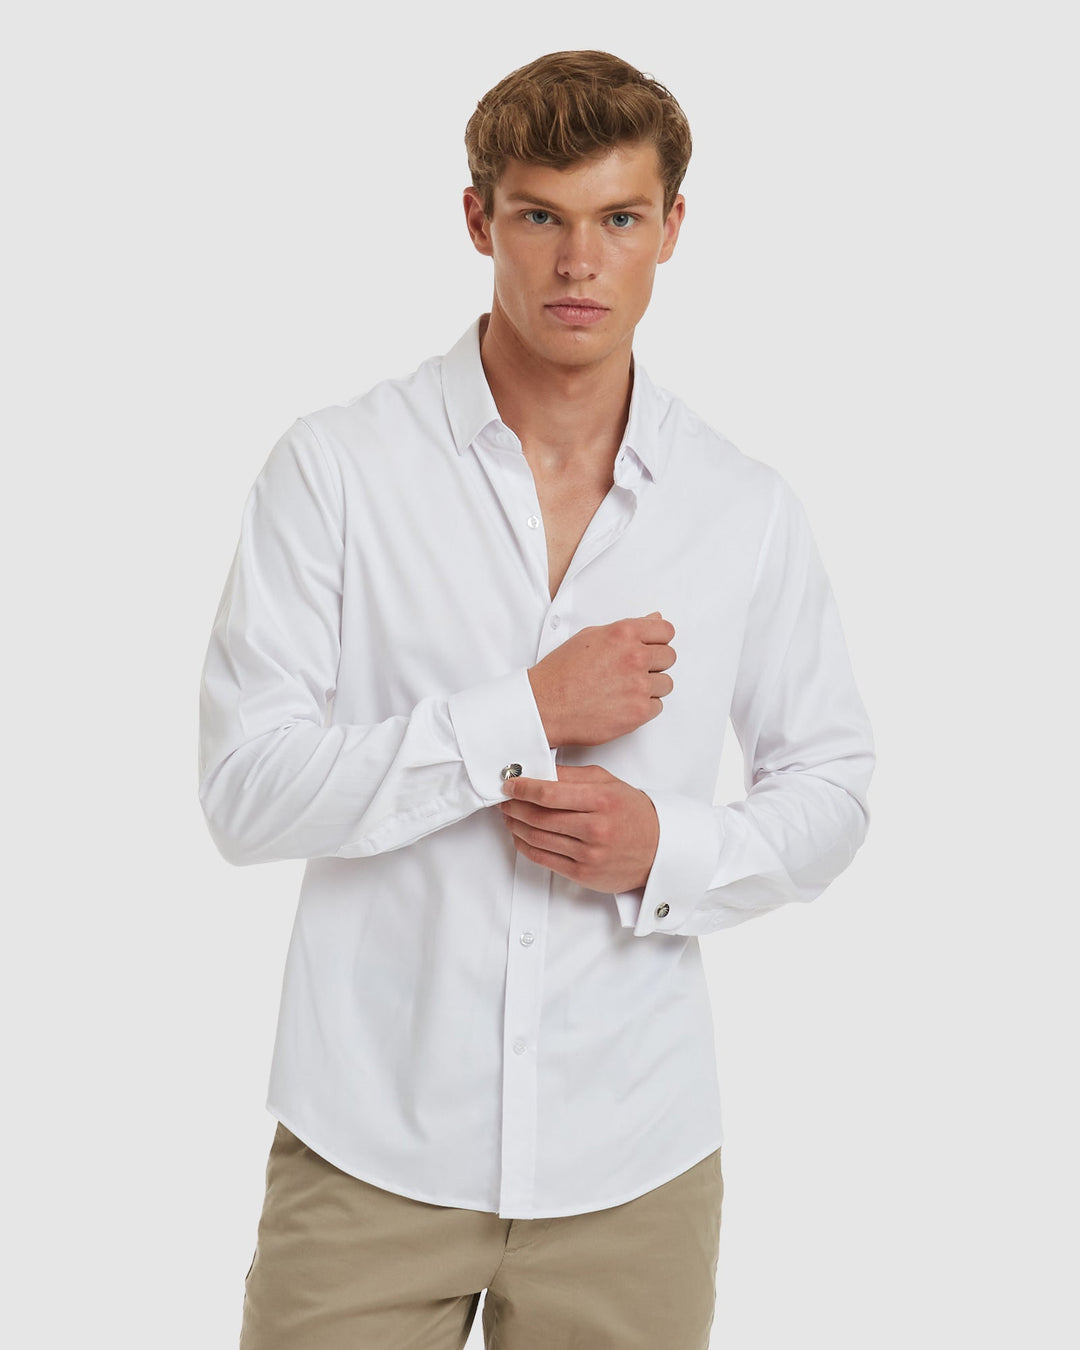 Paris Formal White Shirt with Non Iron Cotton and French Cuffs - Slim Fit